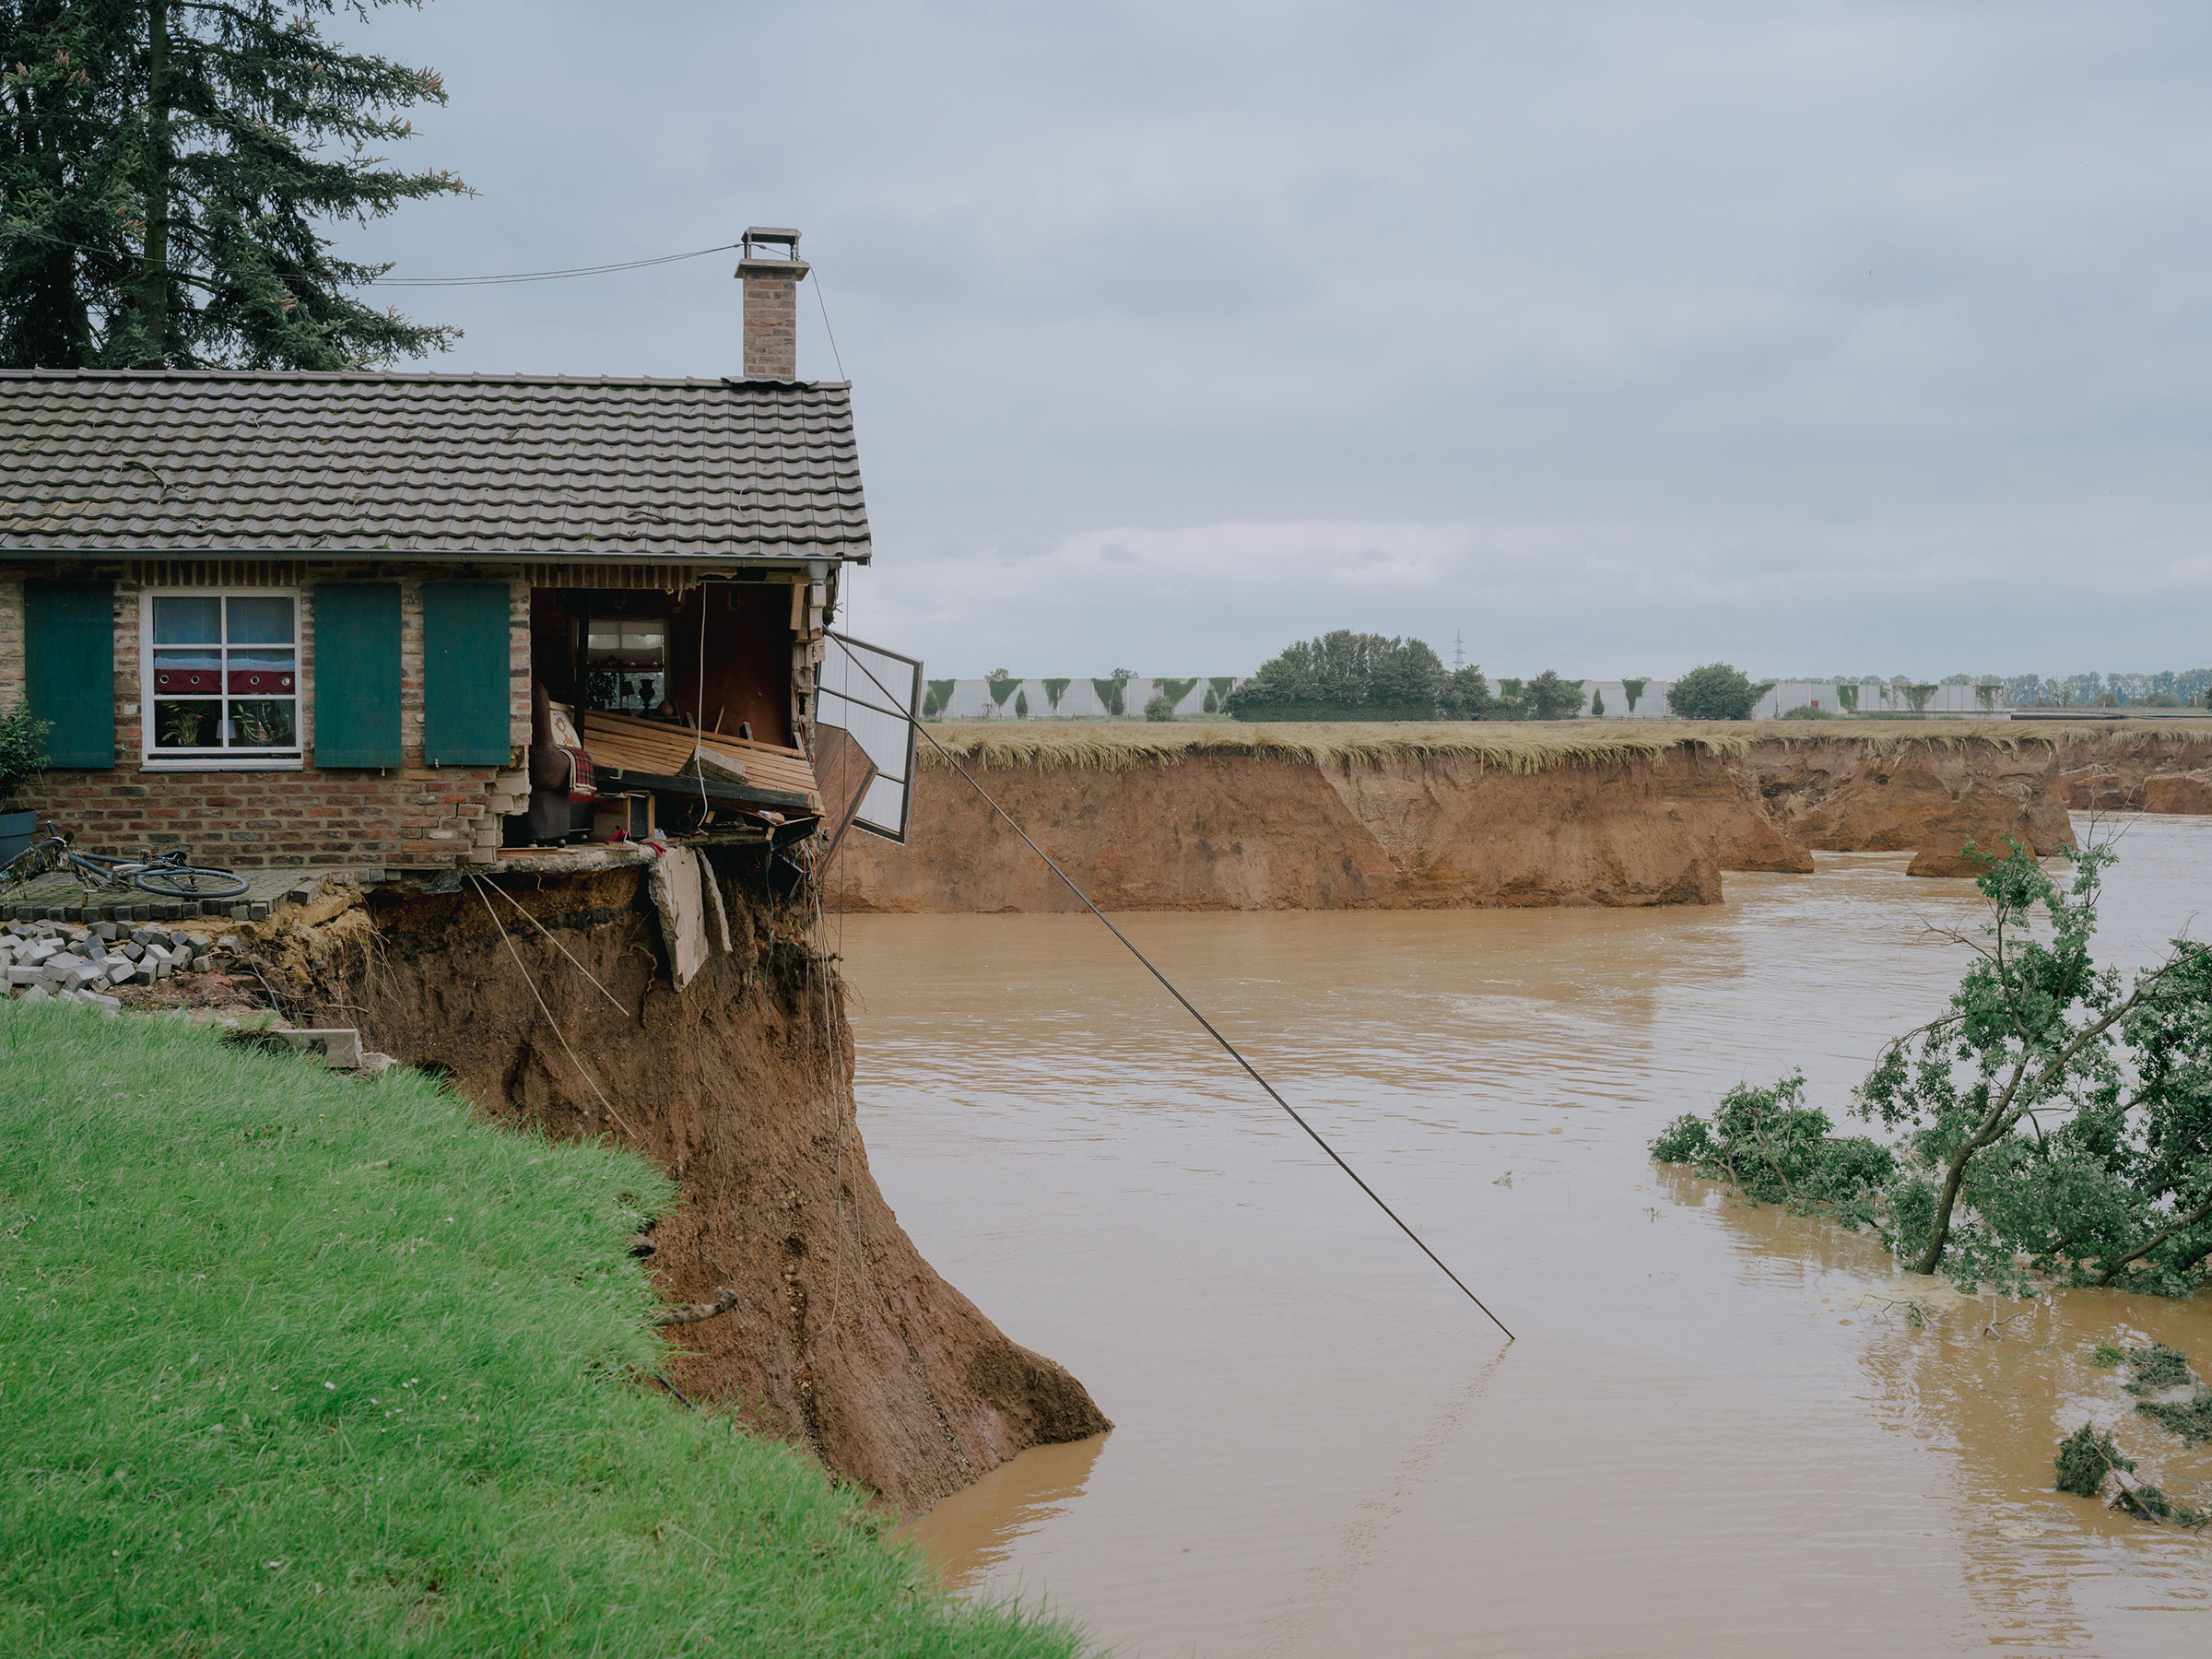 A house damaged by floods in Erfstadt Blessem, Germany, on July 16. (DOCKS Collective)